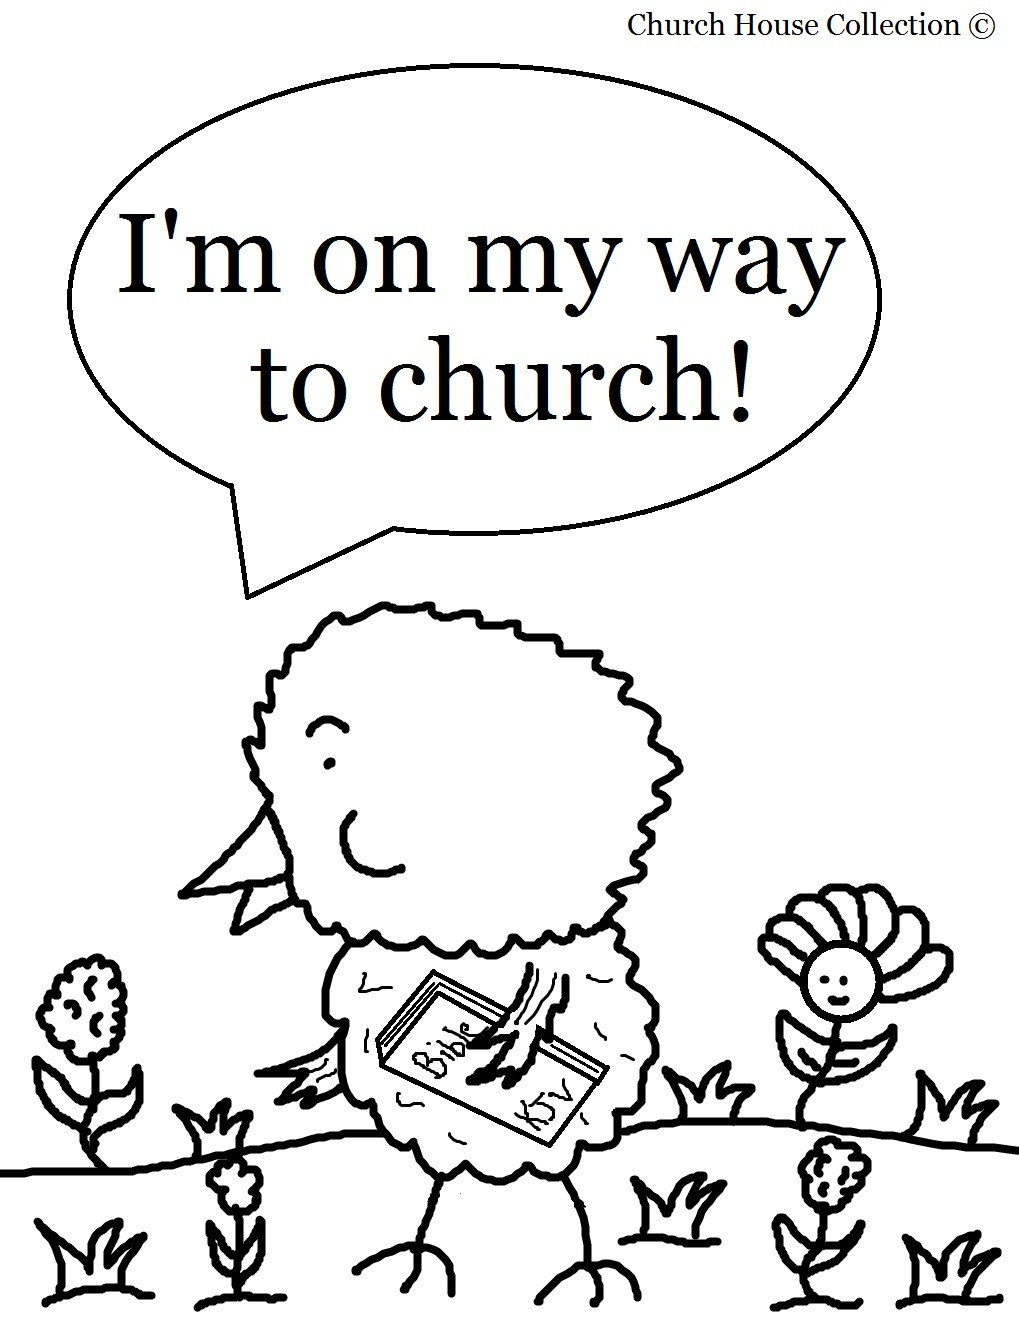 Sunday School Coloring Pages For Toddlers
 Church House Collection Blog Easter Chick Coloring Page